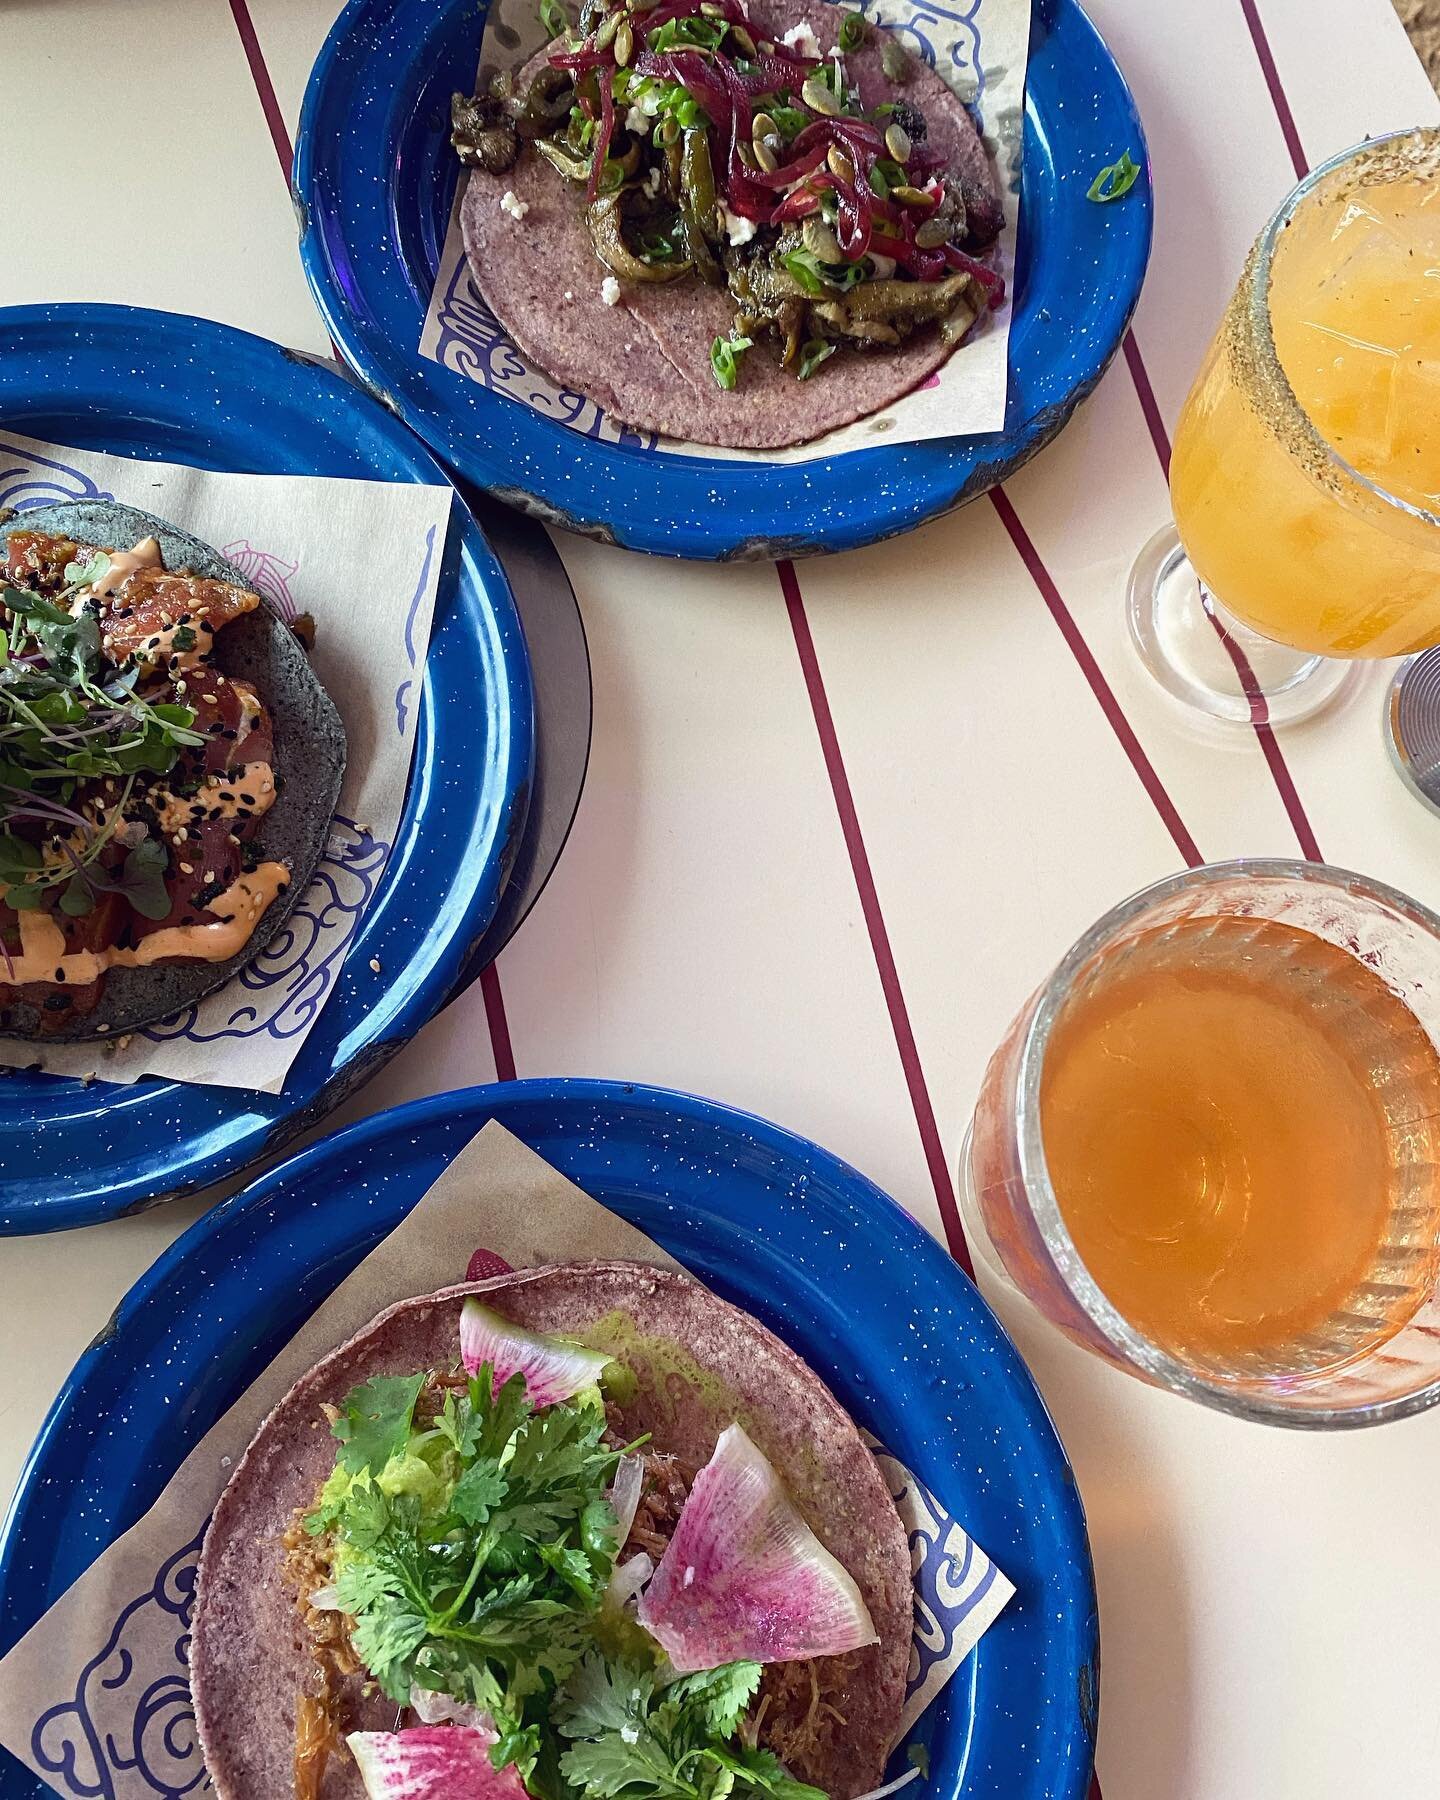 Delicious things in Austin, trips past and present.

🌮 The duck carnitas taco (and more) at @nixtataqueria 

🥭 Frozen mango margs, spicy shrimp and the best fried chicken sandwich at @kindatropical 

🌵 Fried quail sandwich and sotol cocktail tasti